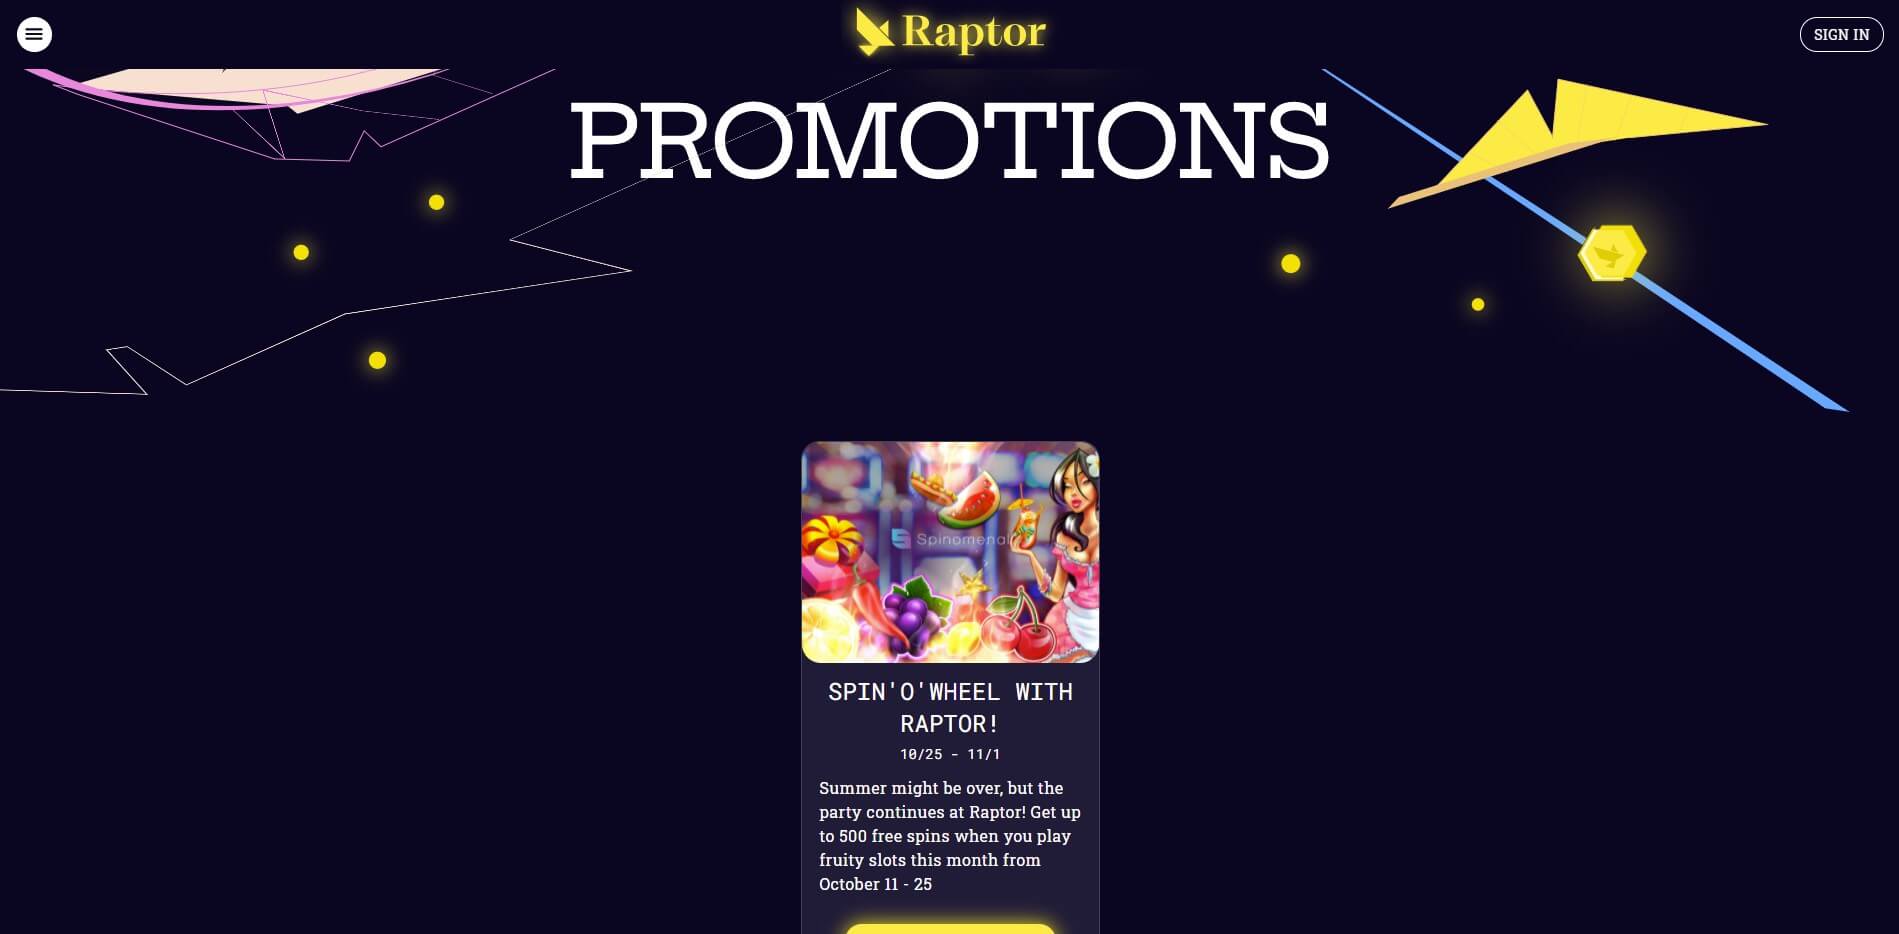 Promotions at Raptor Casino